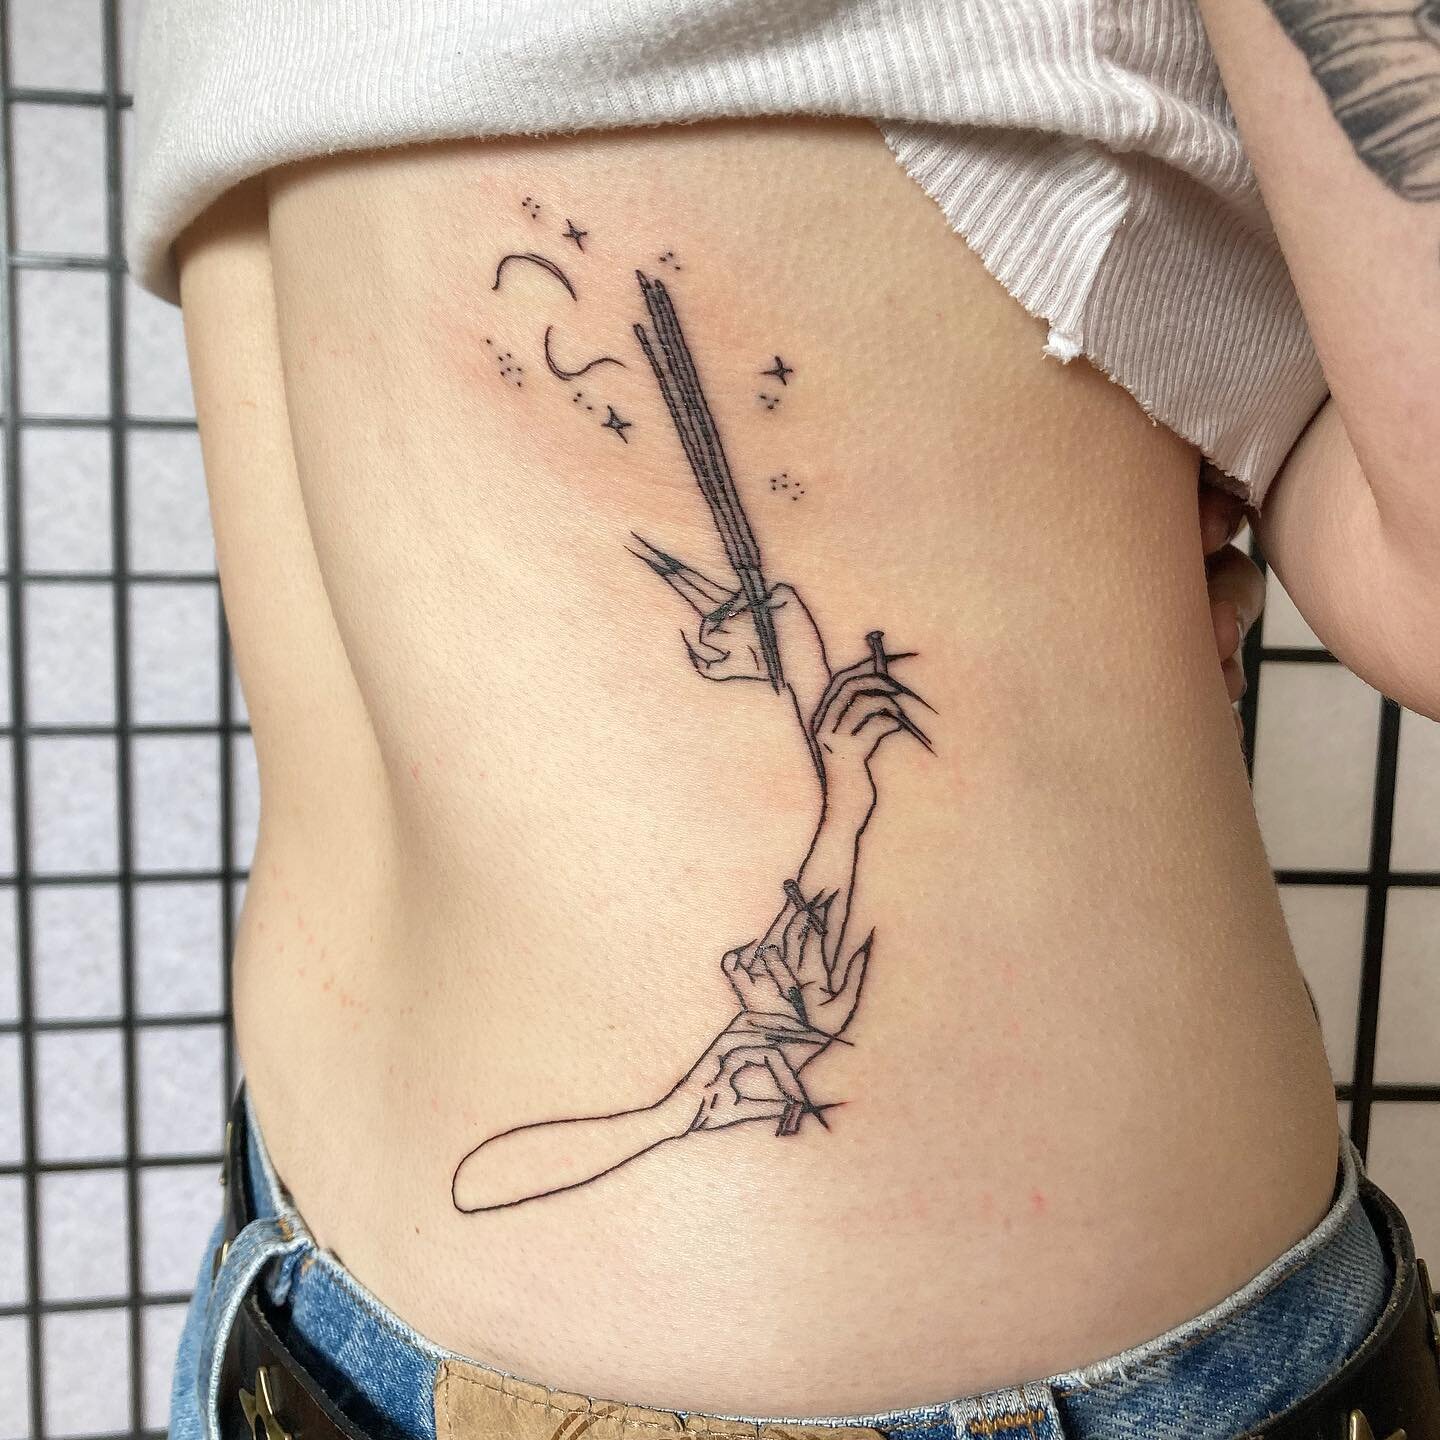 Incense wielding, blunt smokin&rsquo;, asymmetrical torso/lower back tattoos for a real one 💅💅 i LOVE how this turned out, hit me up anytime for stuff like this, it was so great meeting and chatting w u!! ⚡️⚡️ BOOKS OPEN LINK IN BIO TO BOOK